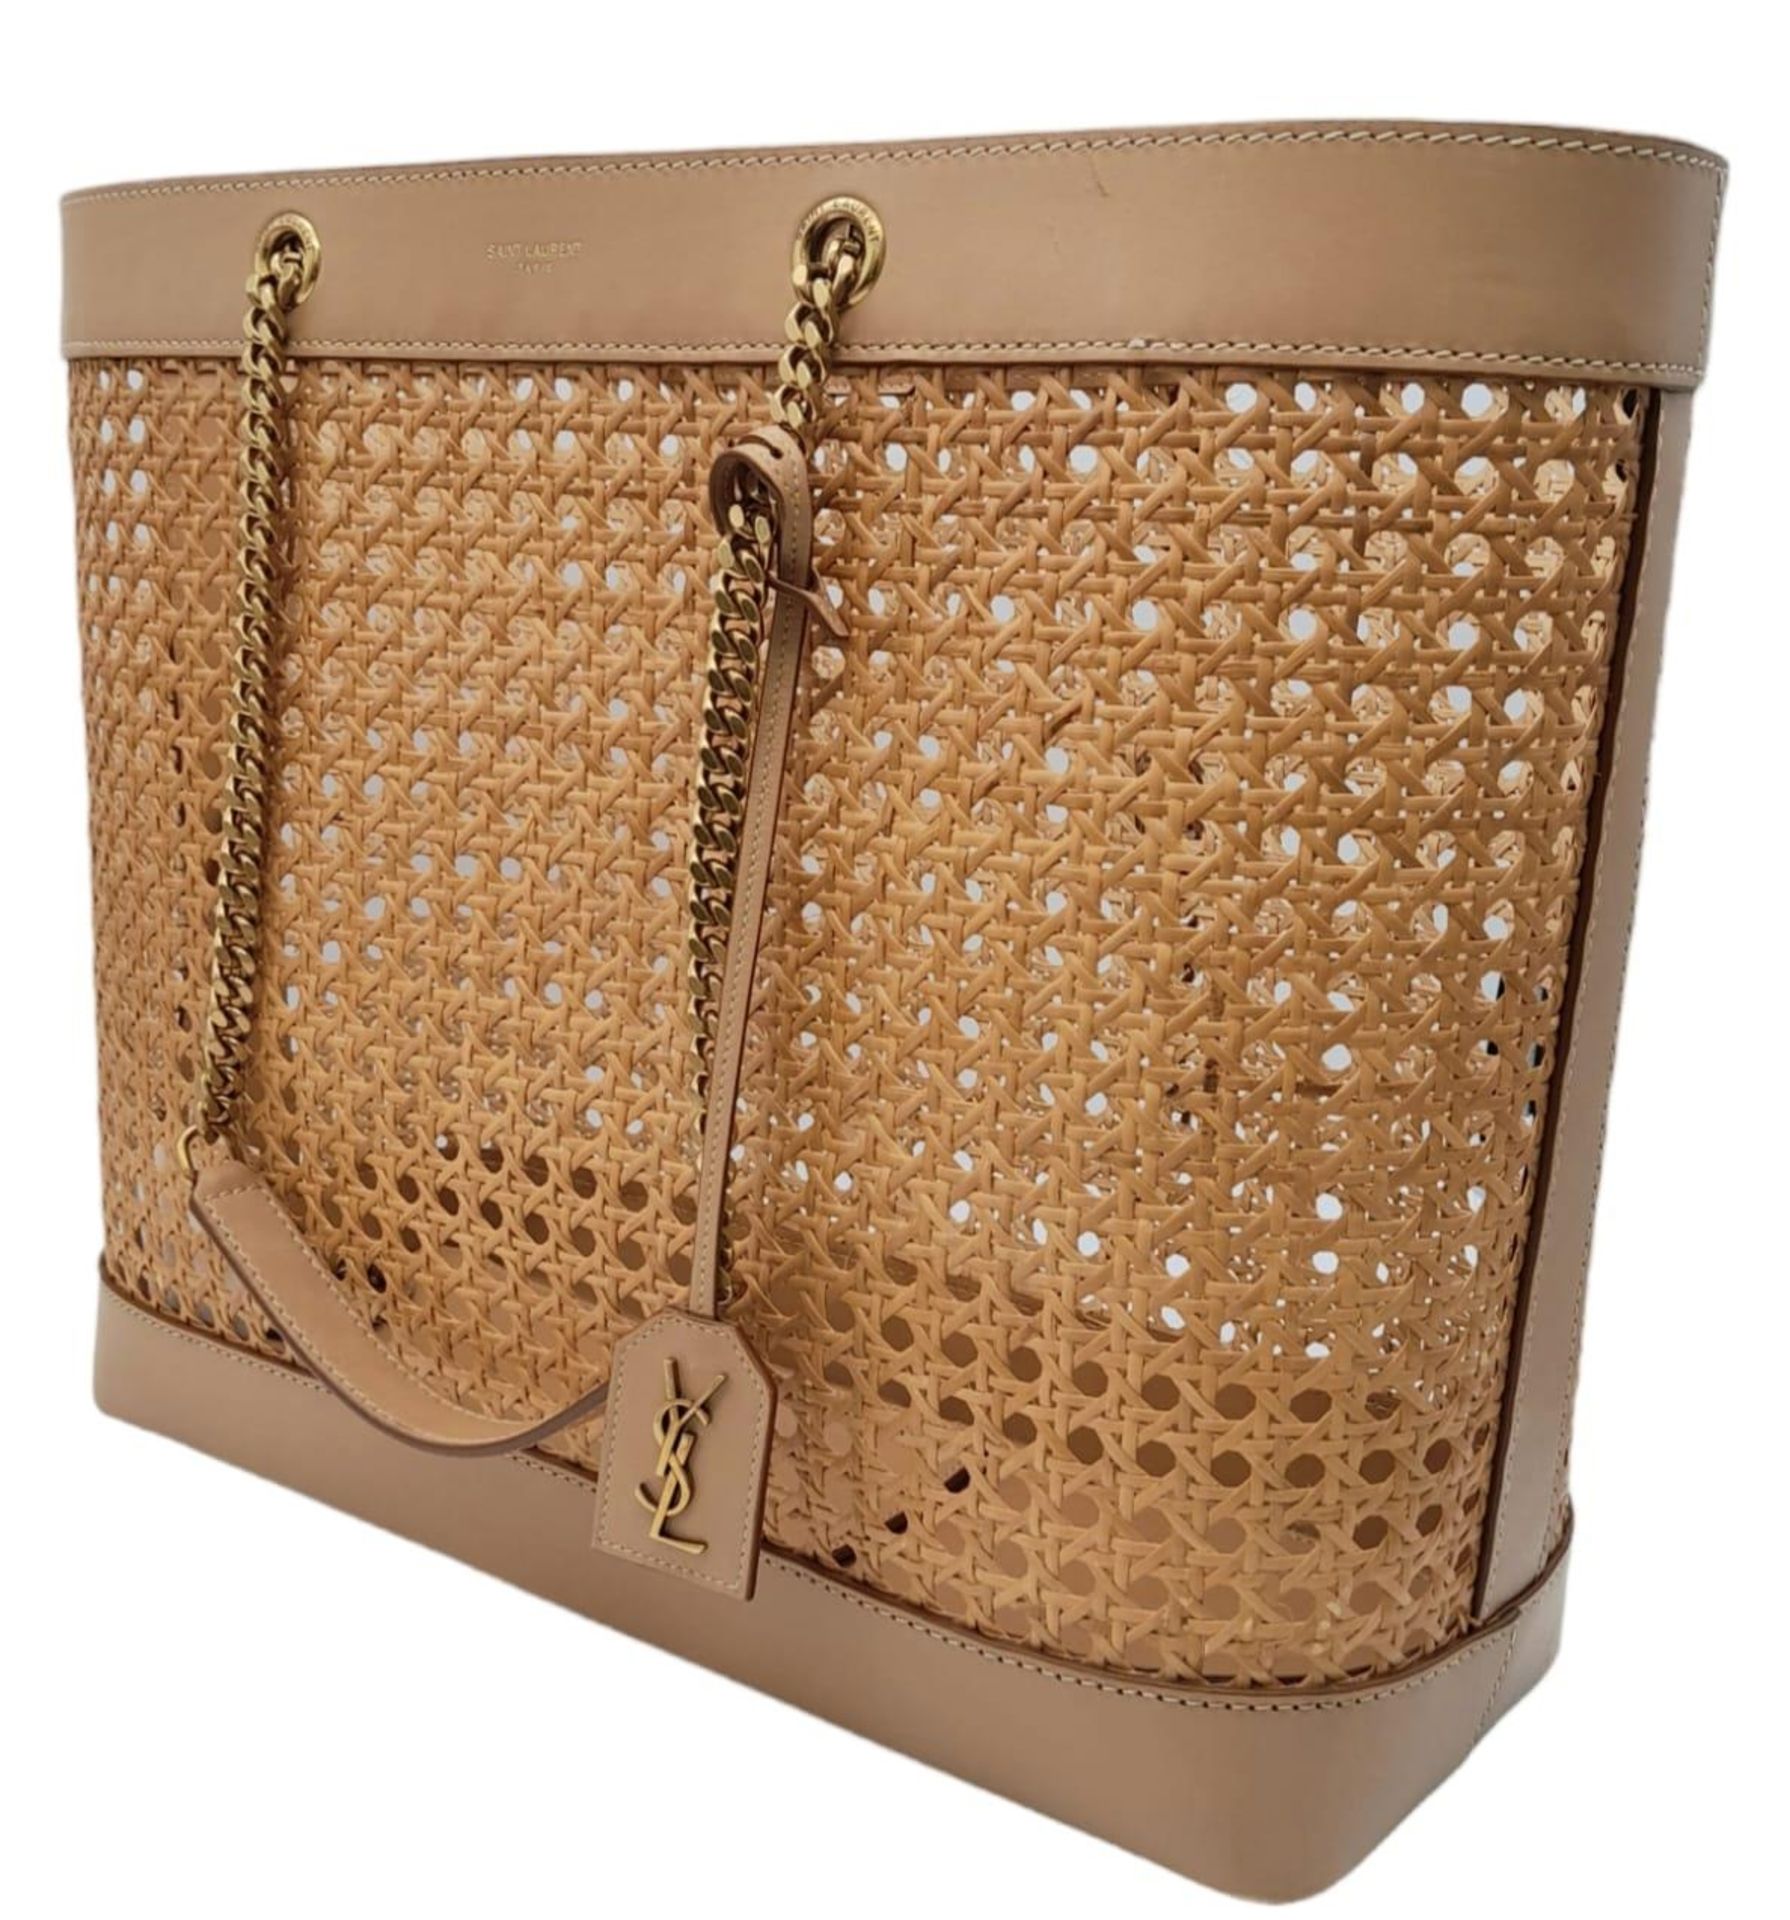 A Saint Laurent Beige Tote Bag. Woven rattan and leather trim exterior. Magnetic closure, gold-toned - Image 2 of 12